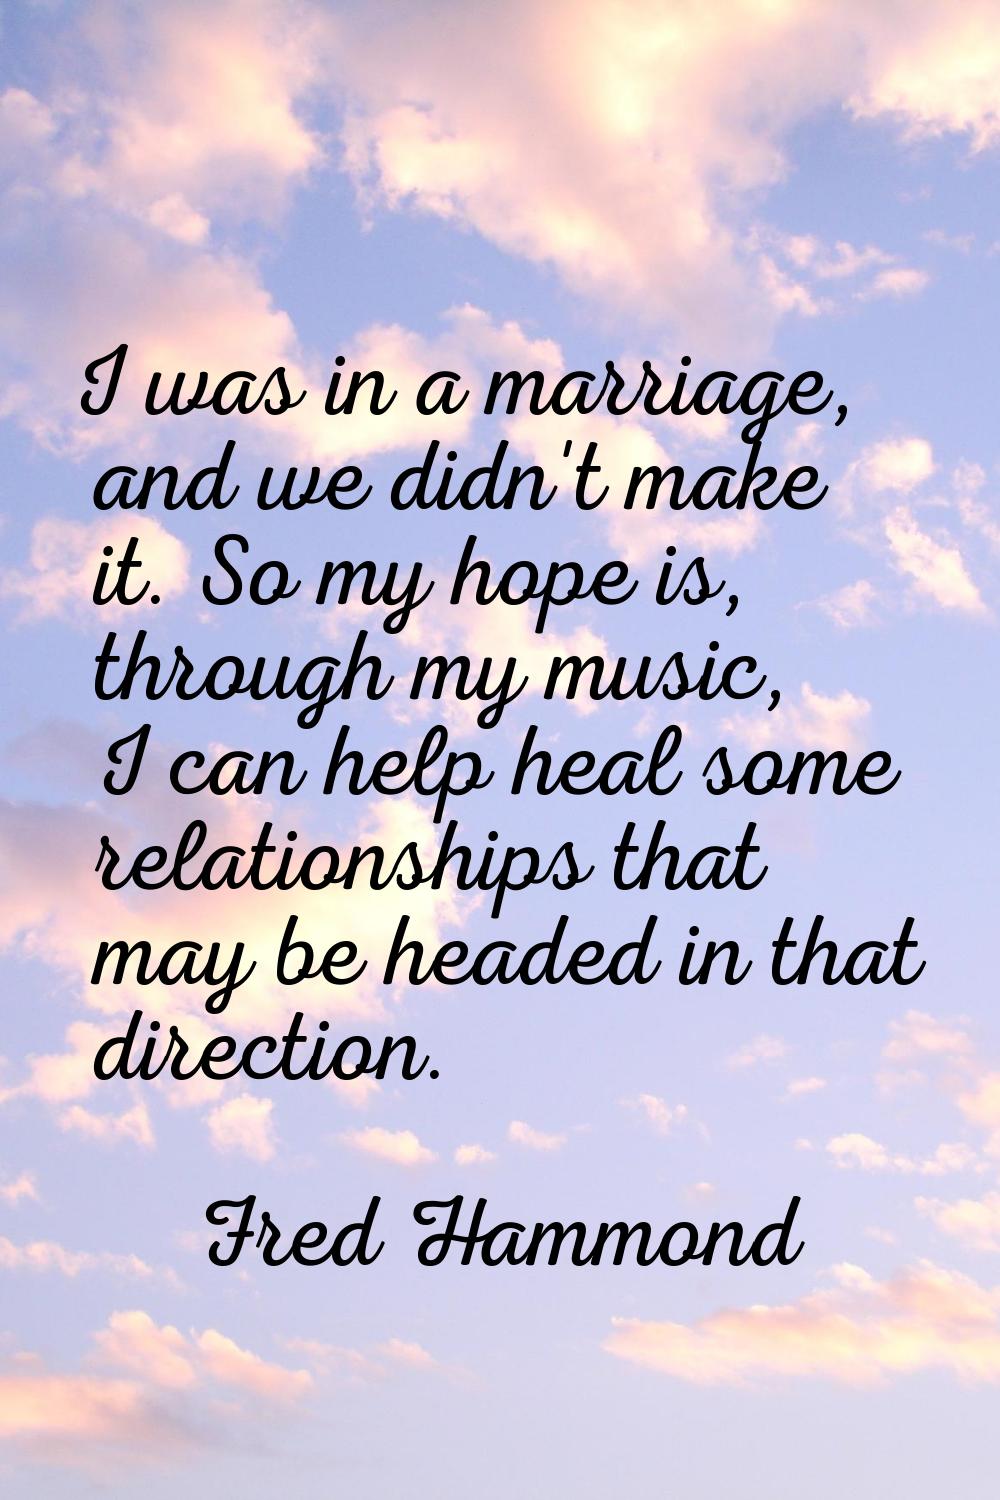 I was in a marriage, and we didn't make it. So my hope is, through my music, I can help heal some r